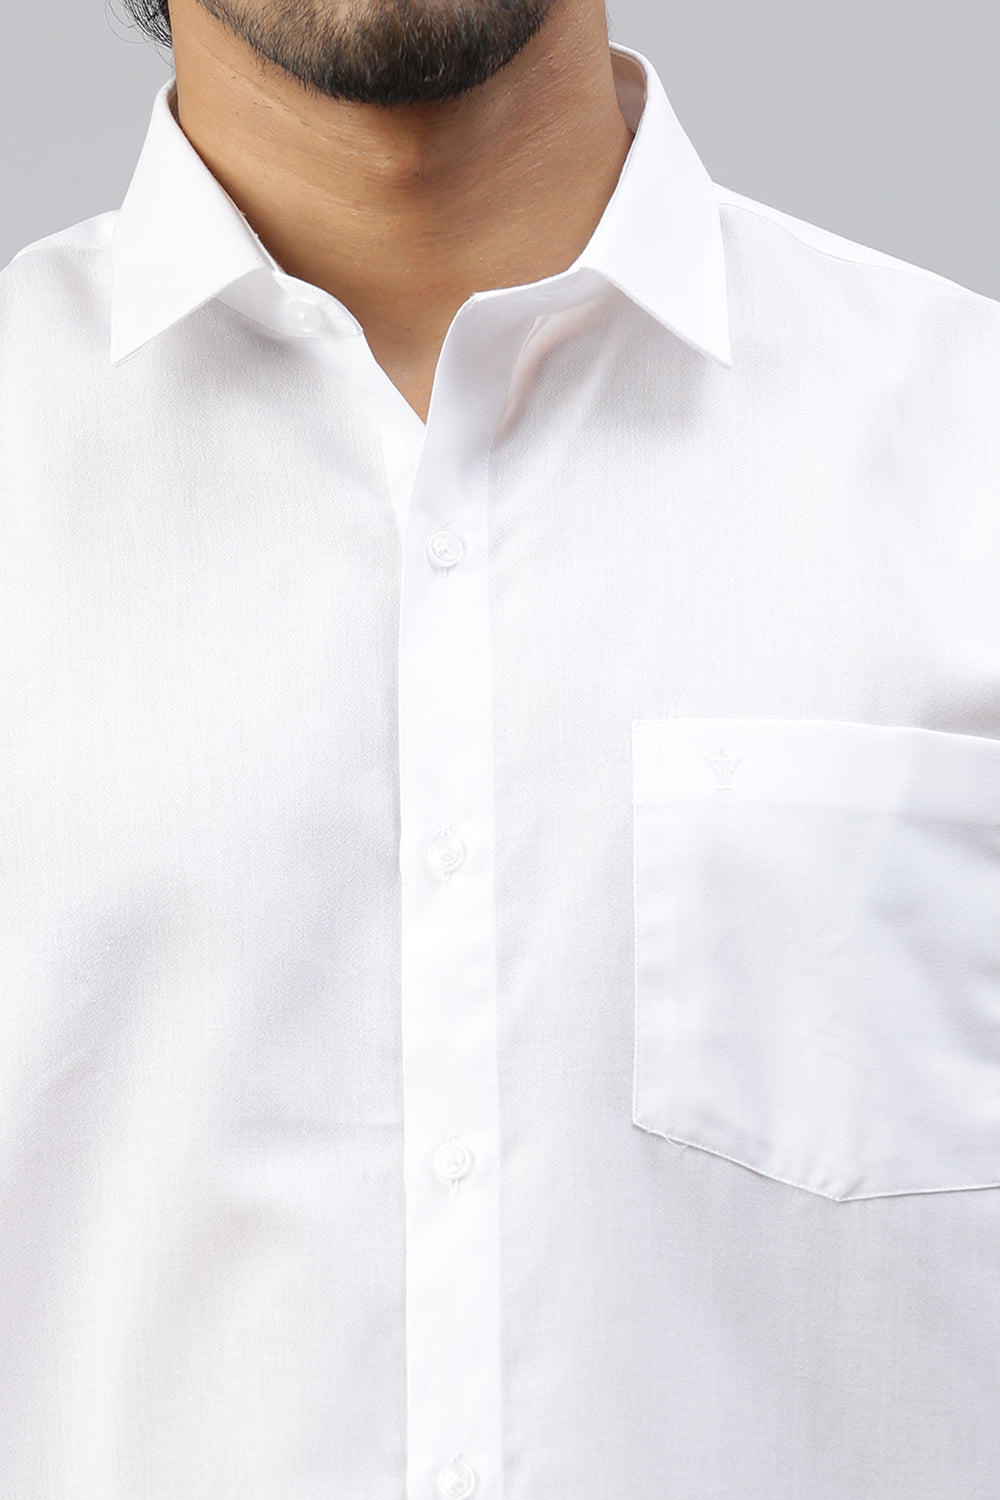 Mens Poly Cotton Full Sleeves White Shirt Expert -Zoom view